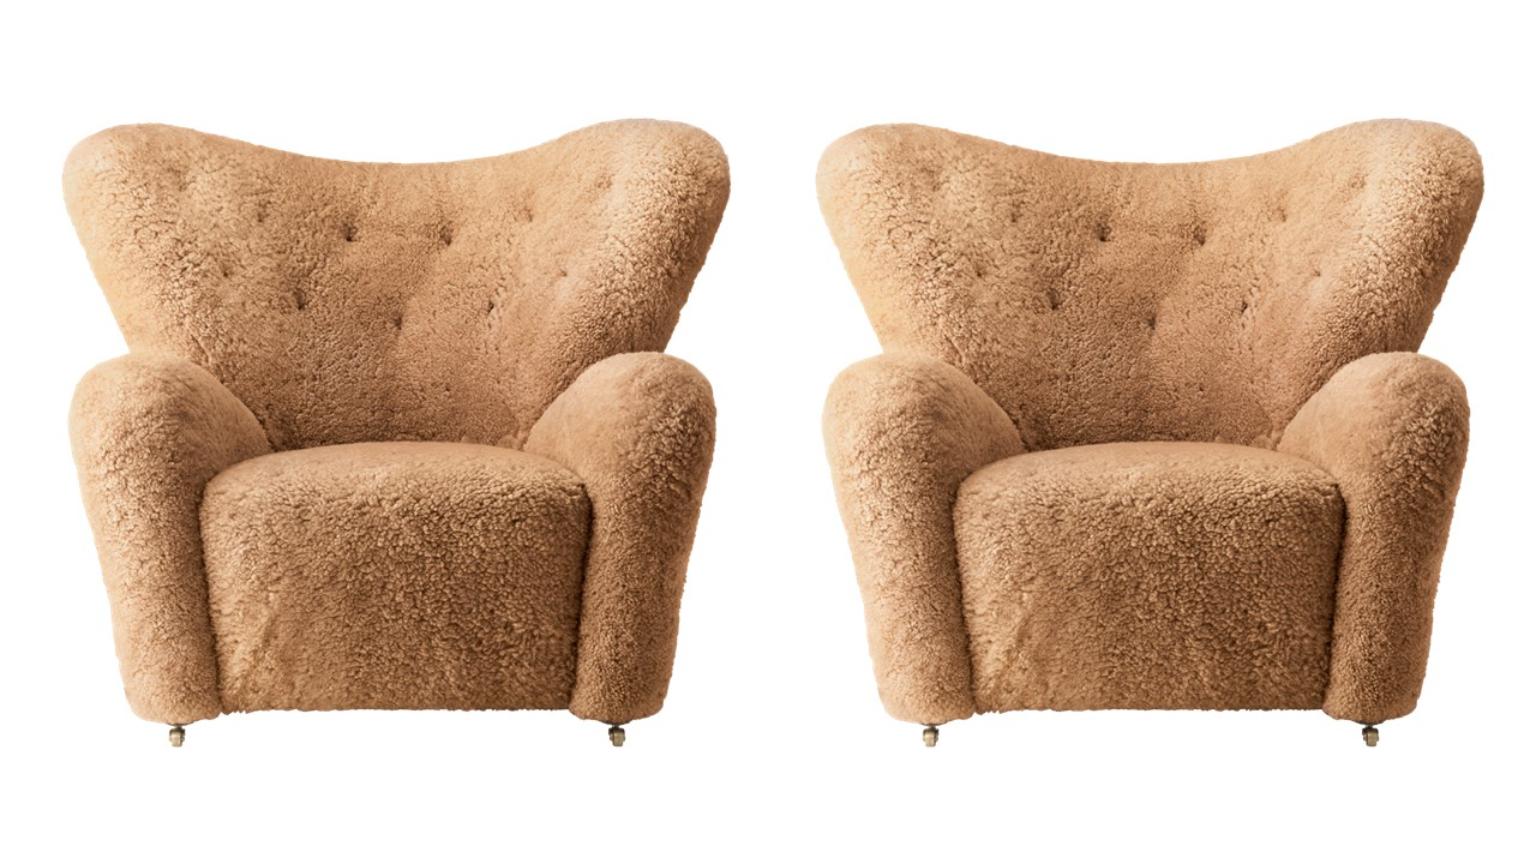 Set of 2 honey sheepskin the tired man lounge chair by Lassen.
Dimensions: W 102 x D 87 x H 88 cm.
Materials: Sheepskin.

Flemming Lassen designed the overstuffed easy chair, The Tired Man, for The Copenhagen Cabinetmakers’ Guild Competition in